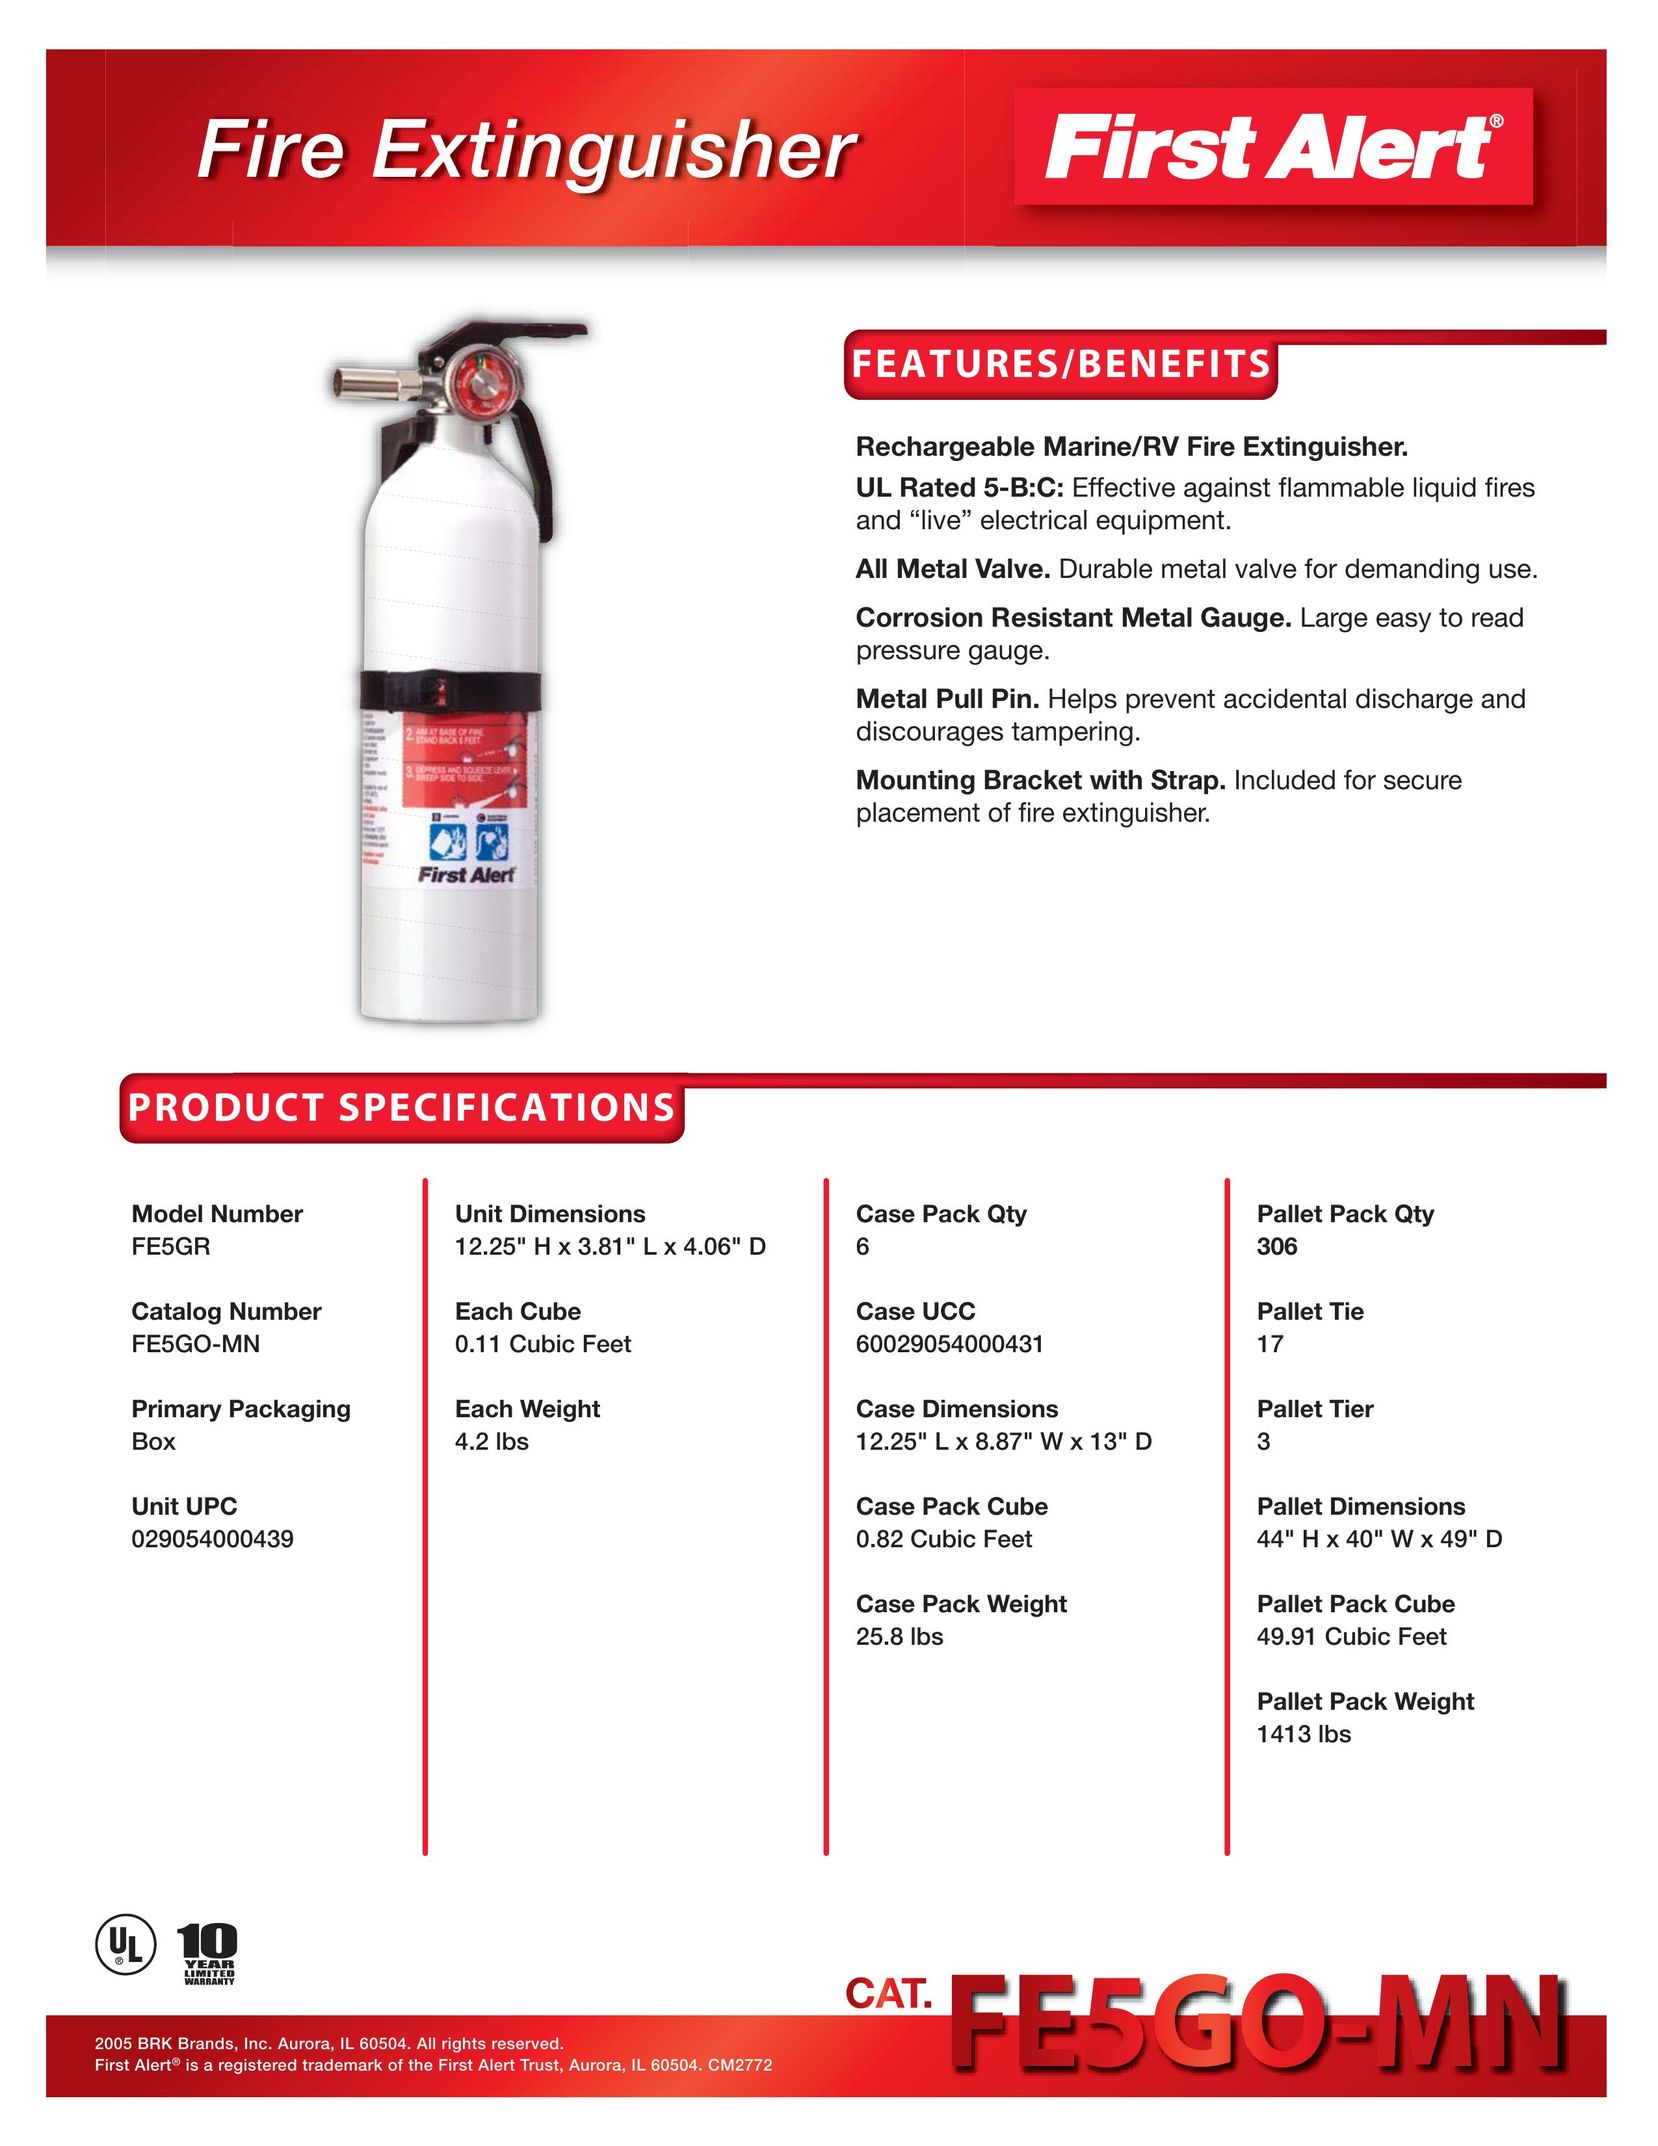 BRK electronic FE5GO-MN Fire Extinguisher User Manual